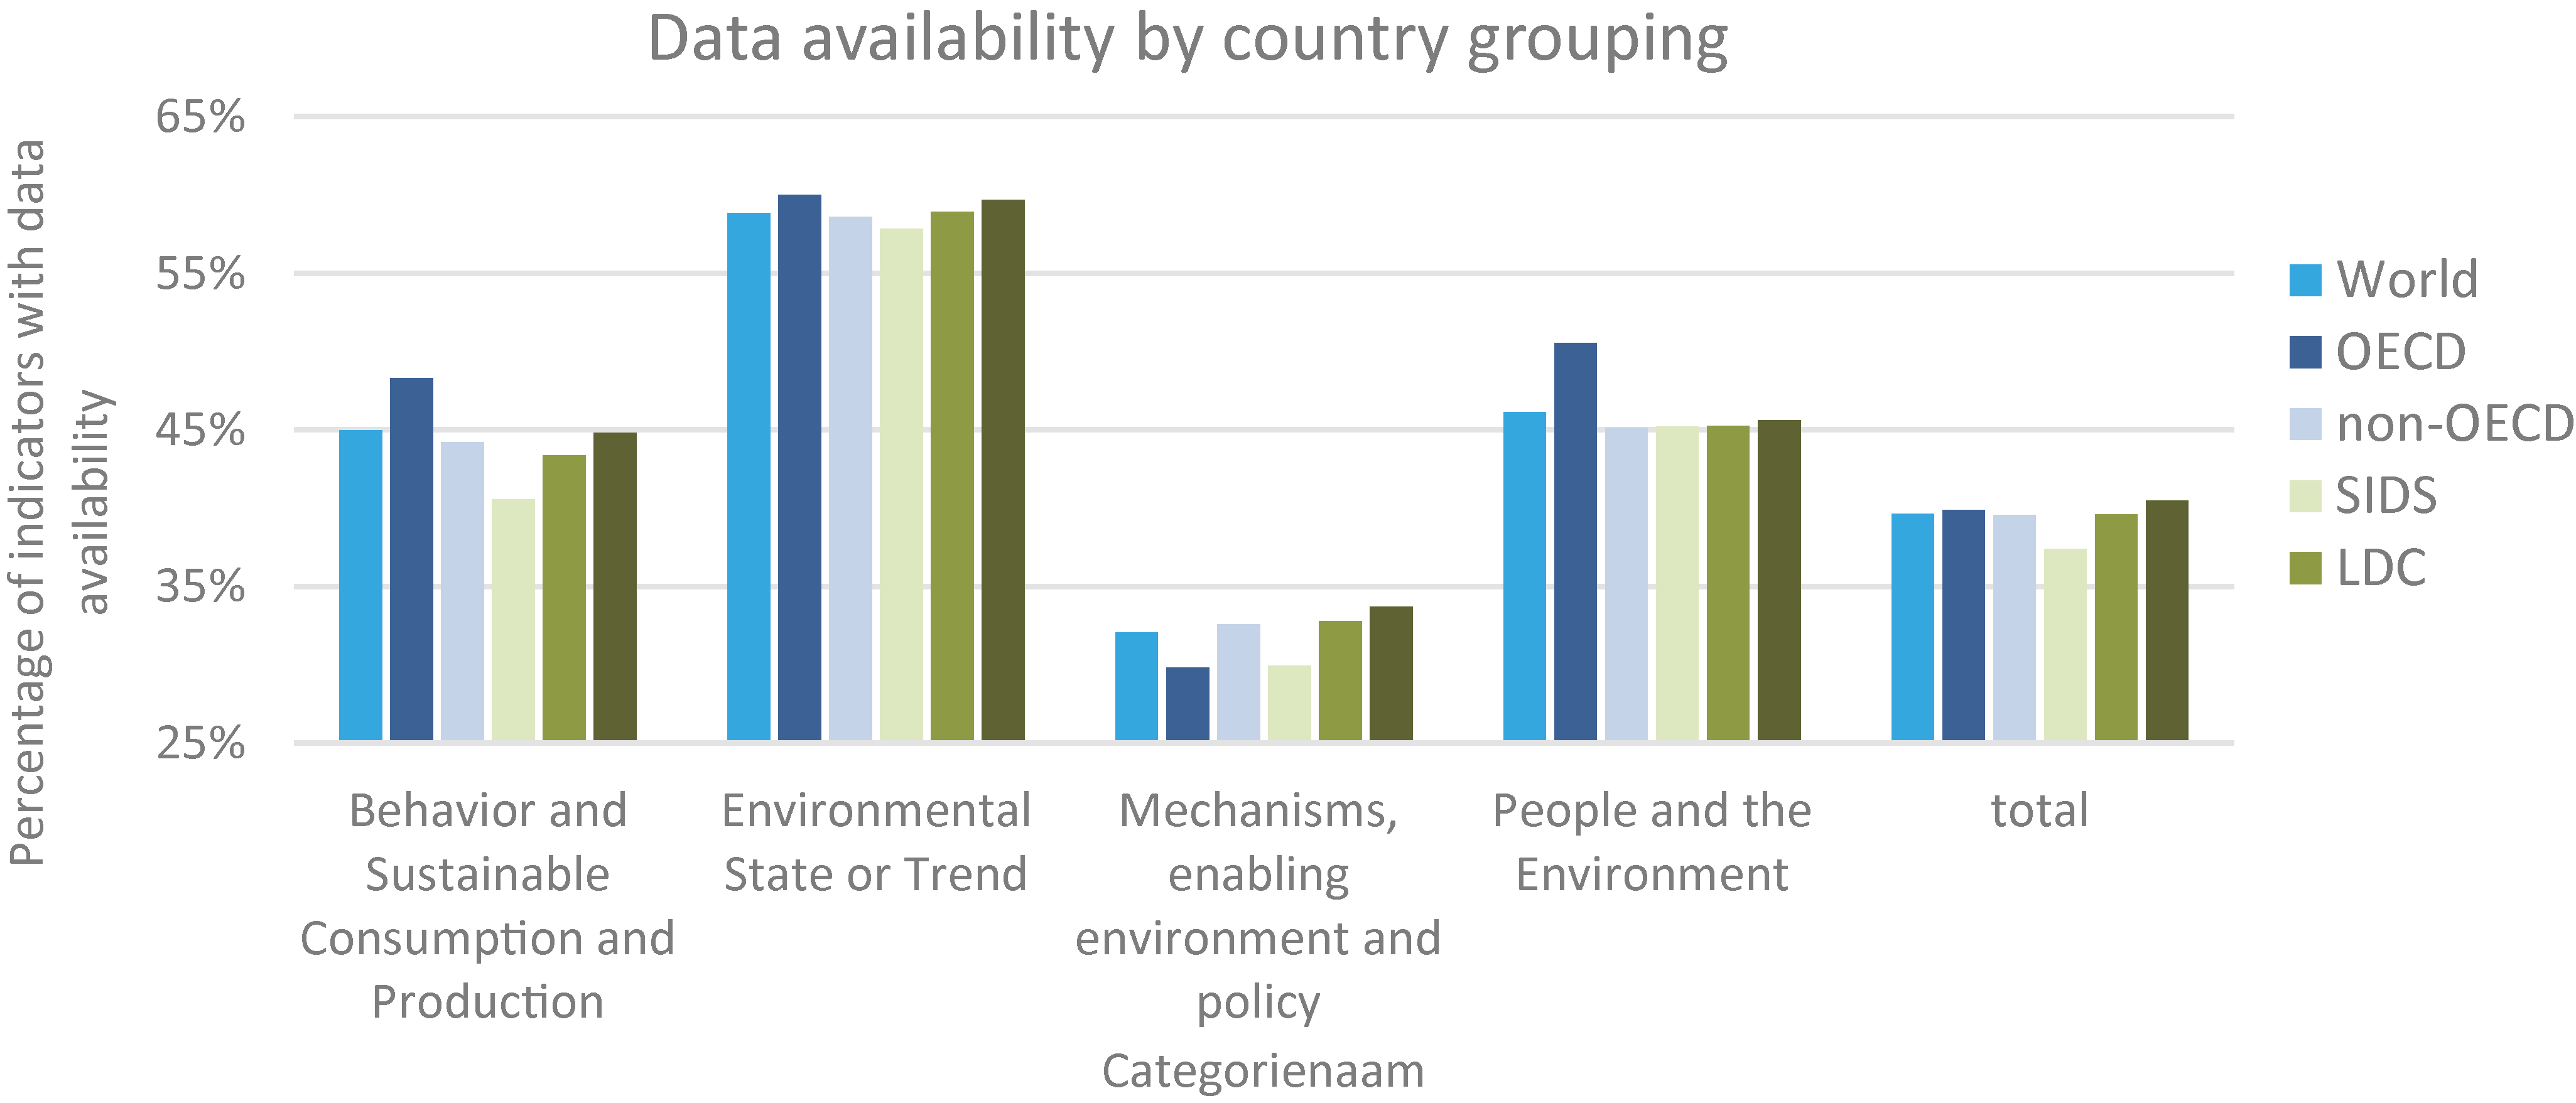 Data availability by indicator category and country group, 2019.